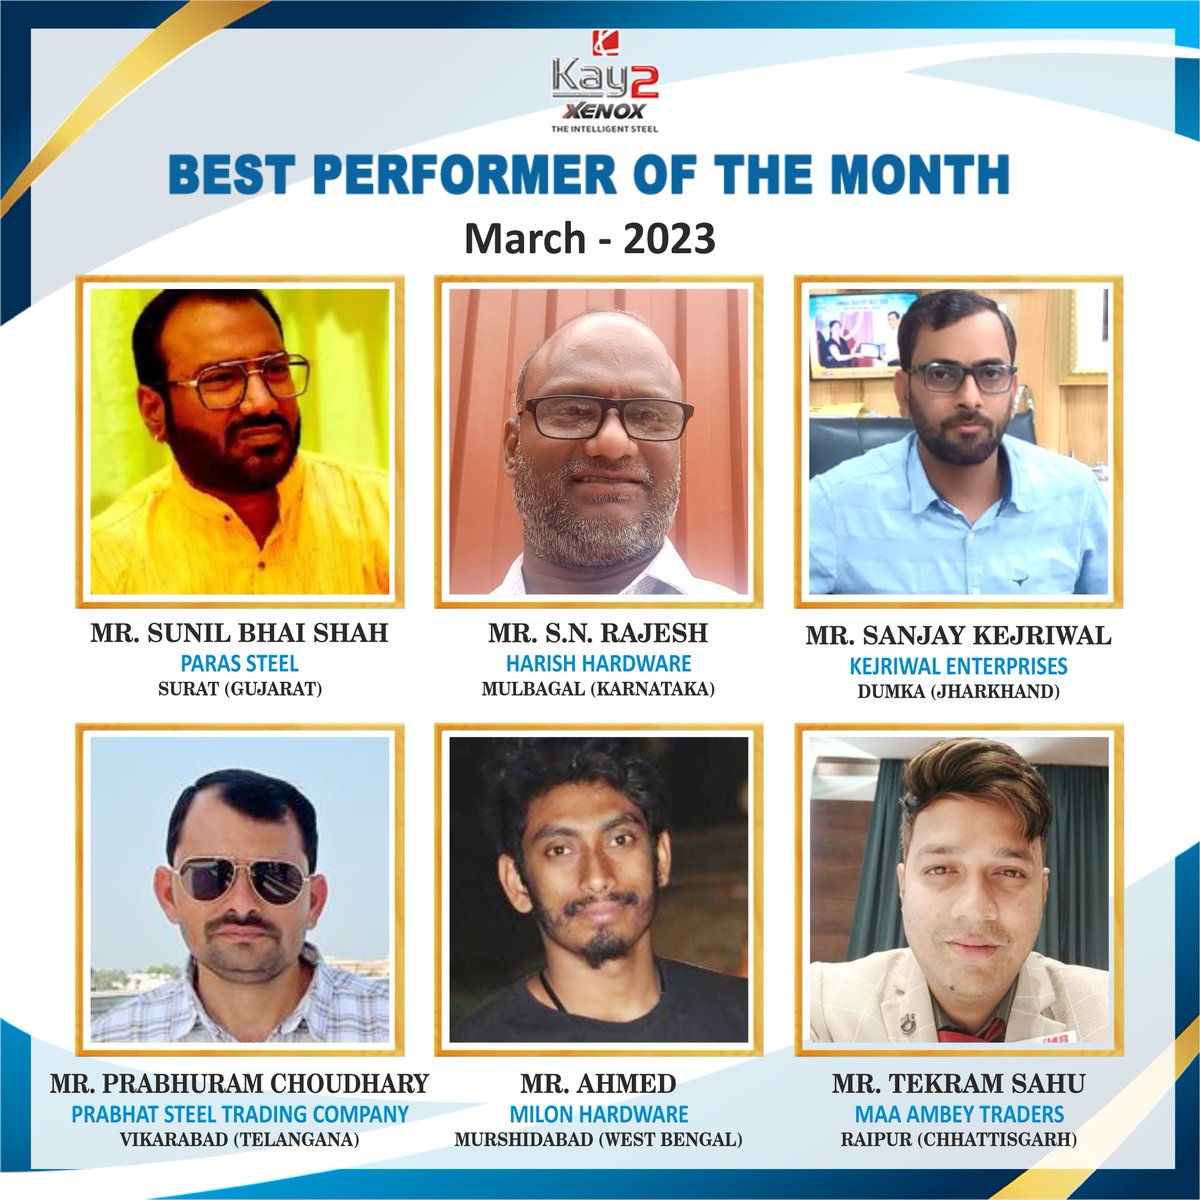 When your motivations are strong, you will surpass the ordinary to achieve your goal. Kay2 Xenox congratulates the Best Performers for March 2023 on meeting their business goals & setting a great example.

#DealerOfTheMonth #BestPerformer #Kay2Xenox #Kay2Steel #TMTbars #Strength